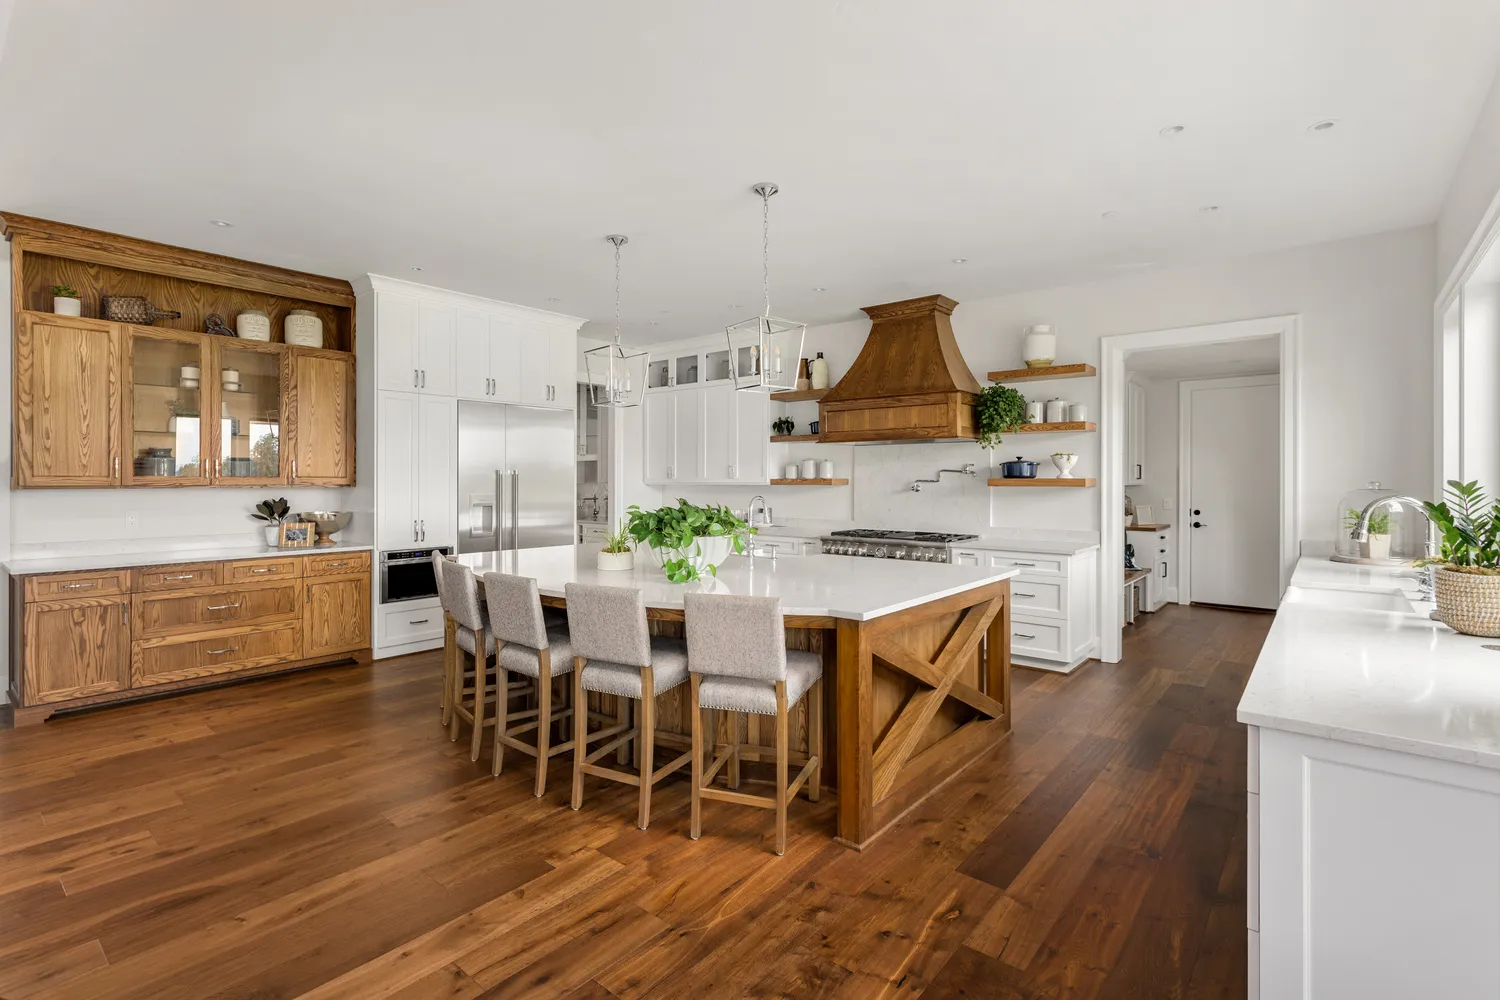 white farmhouse style kitchen with wooden details matching the hardwood flooring